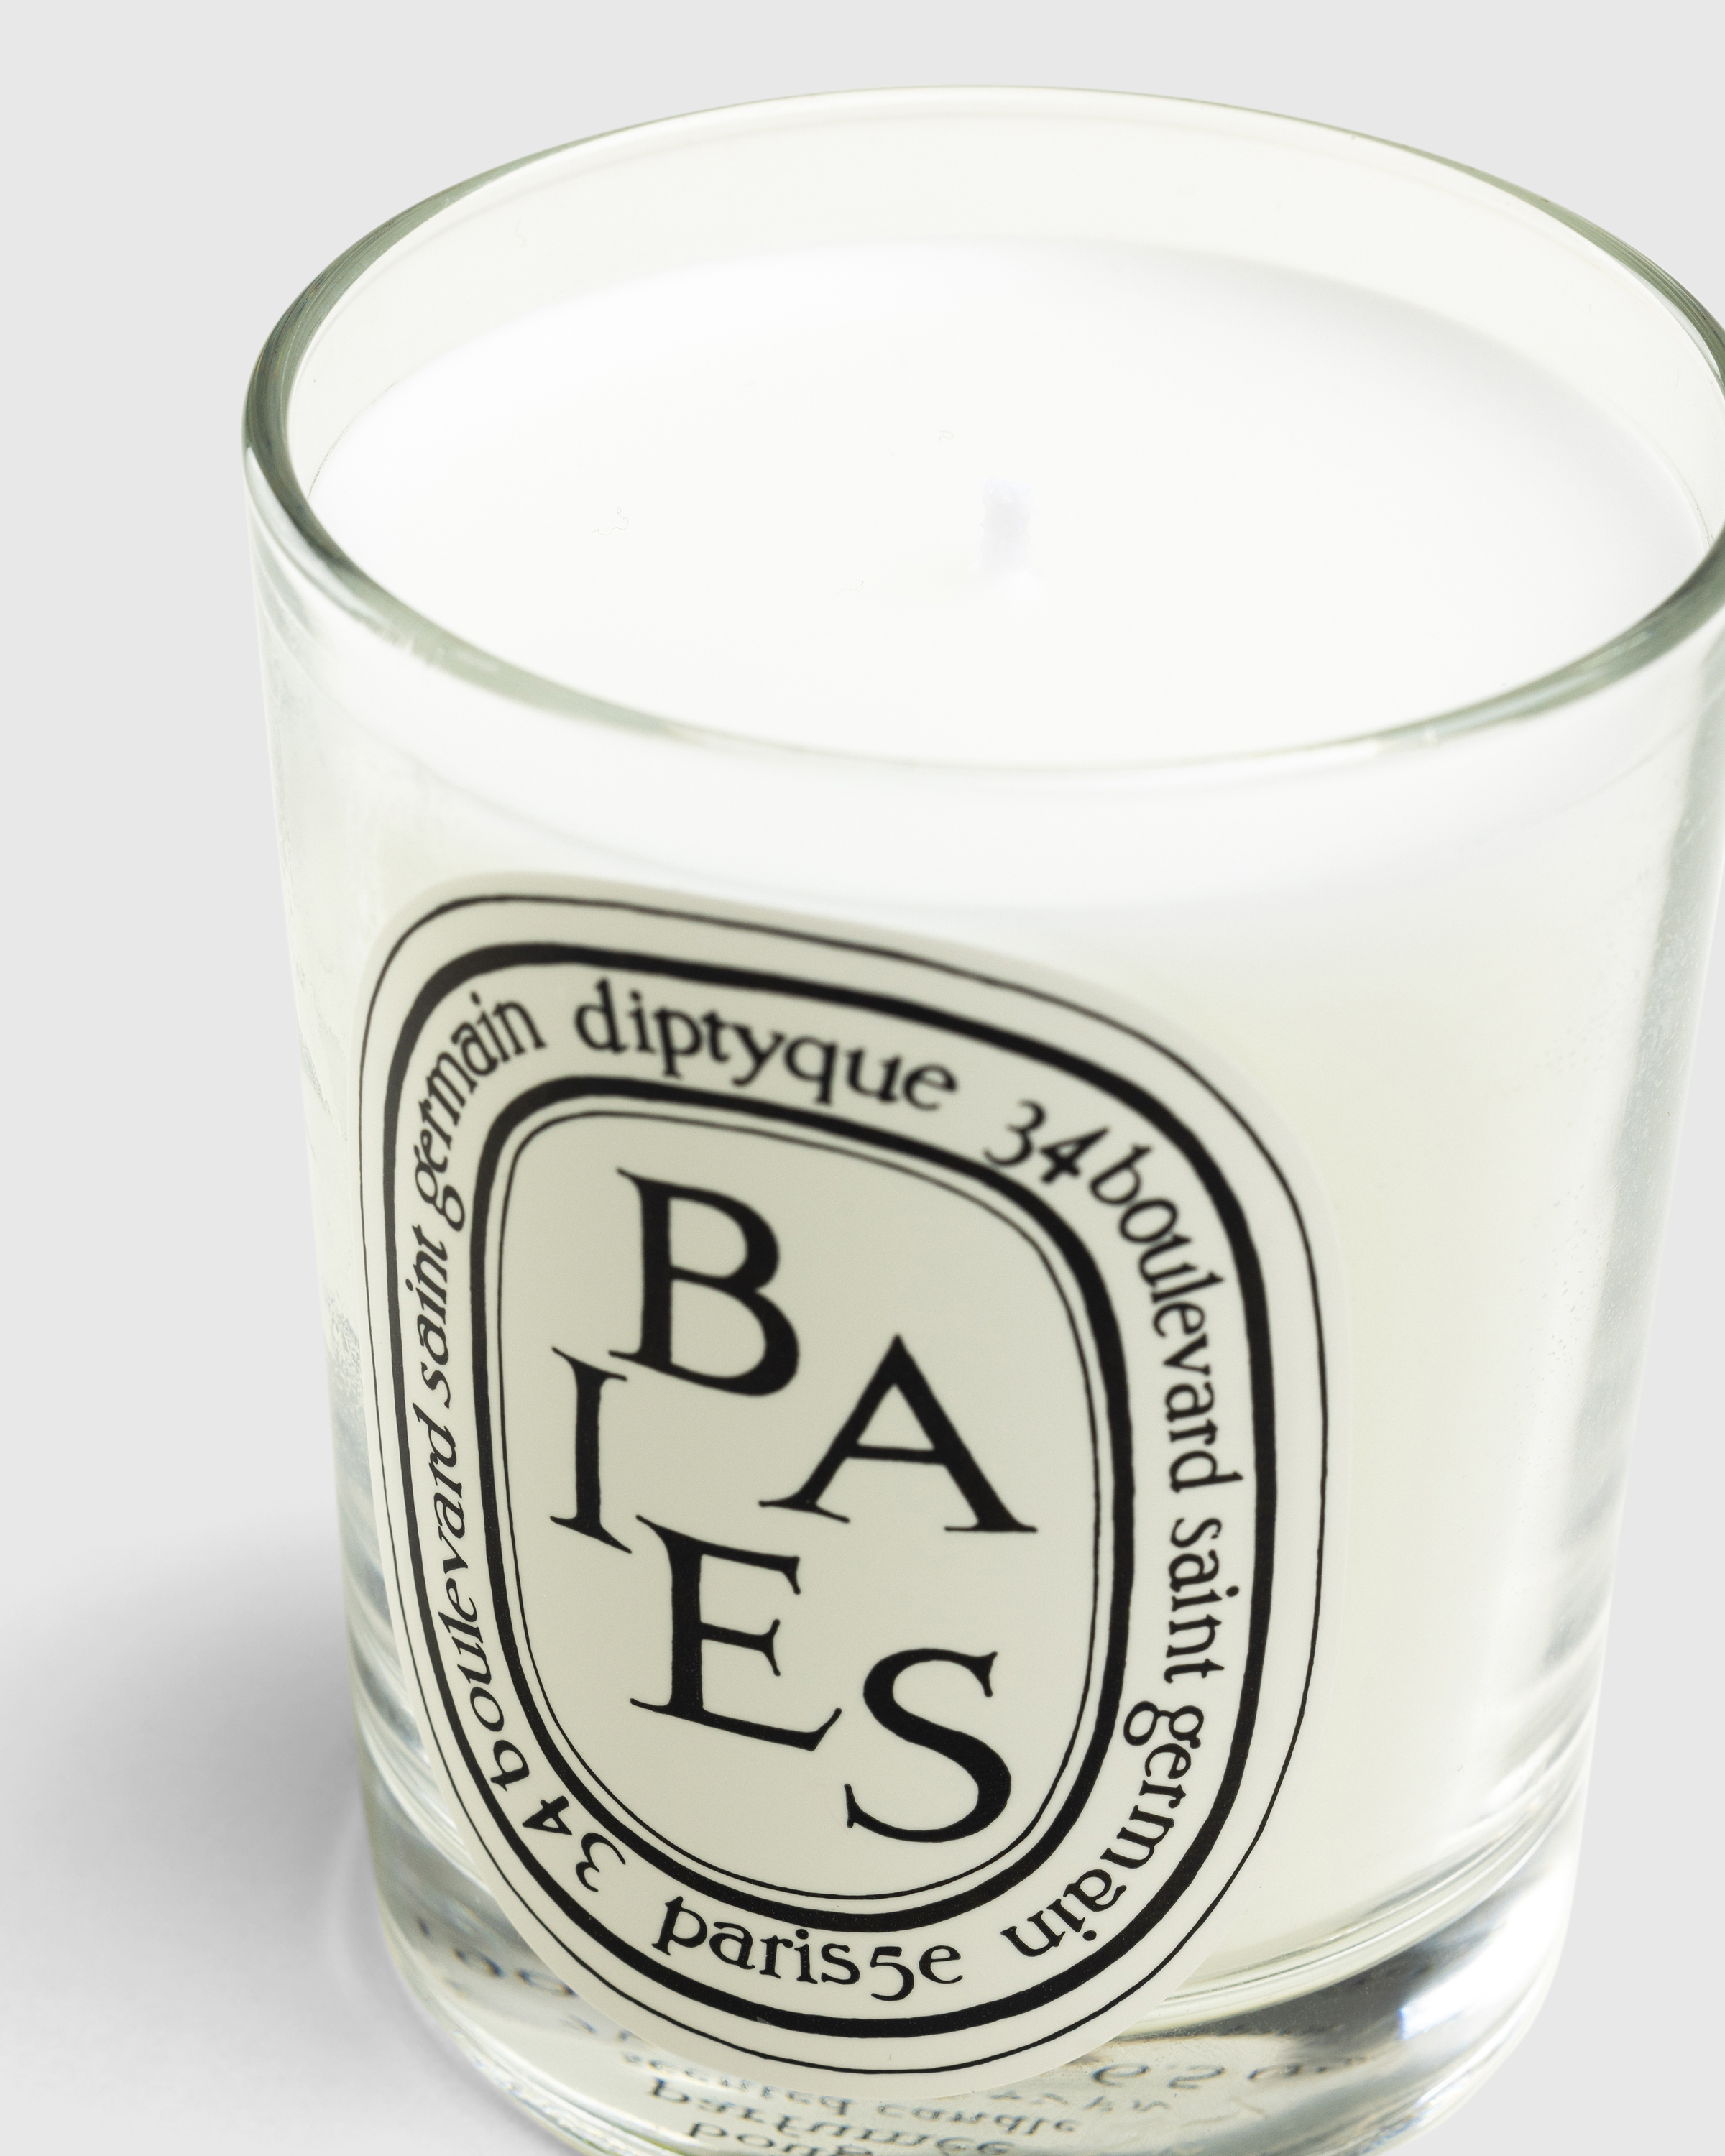 Diptyque – Standard Candle Baies 190g - Candles & Fragrances - White - Image 2